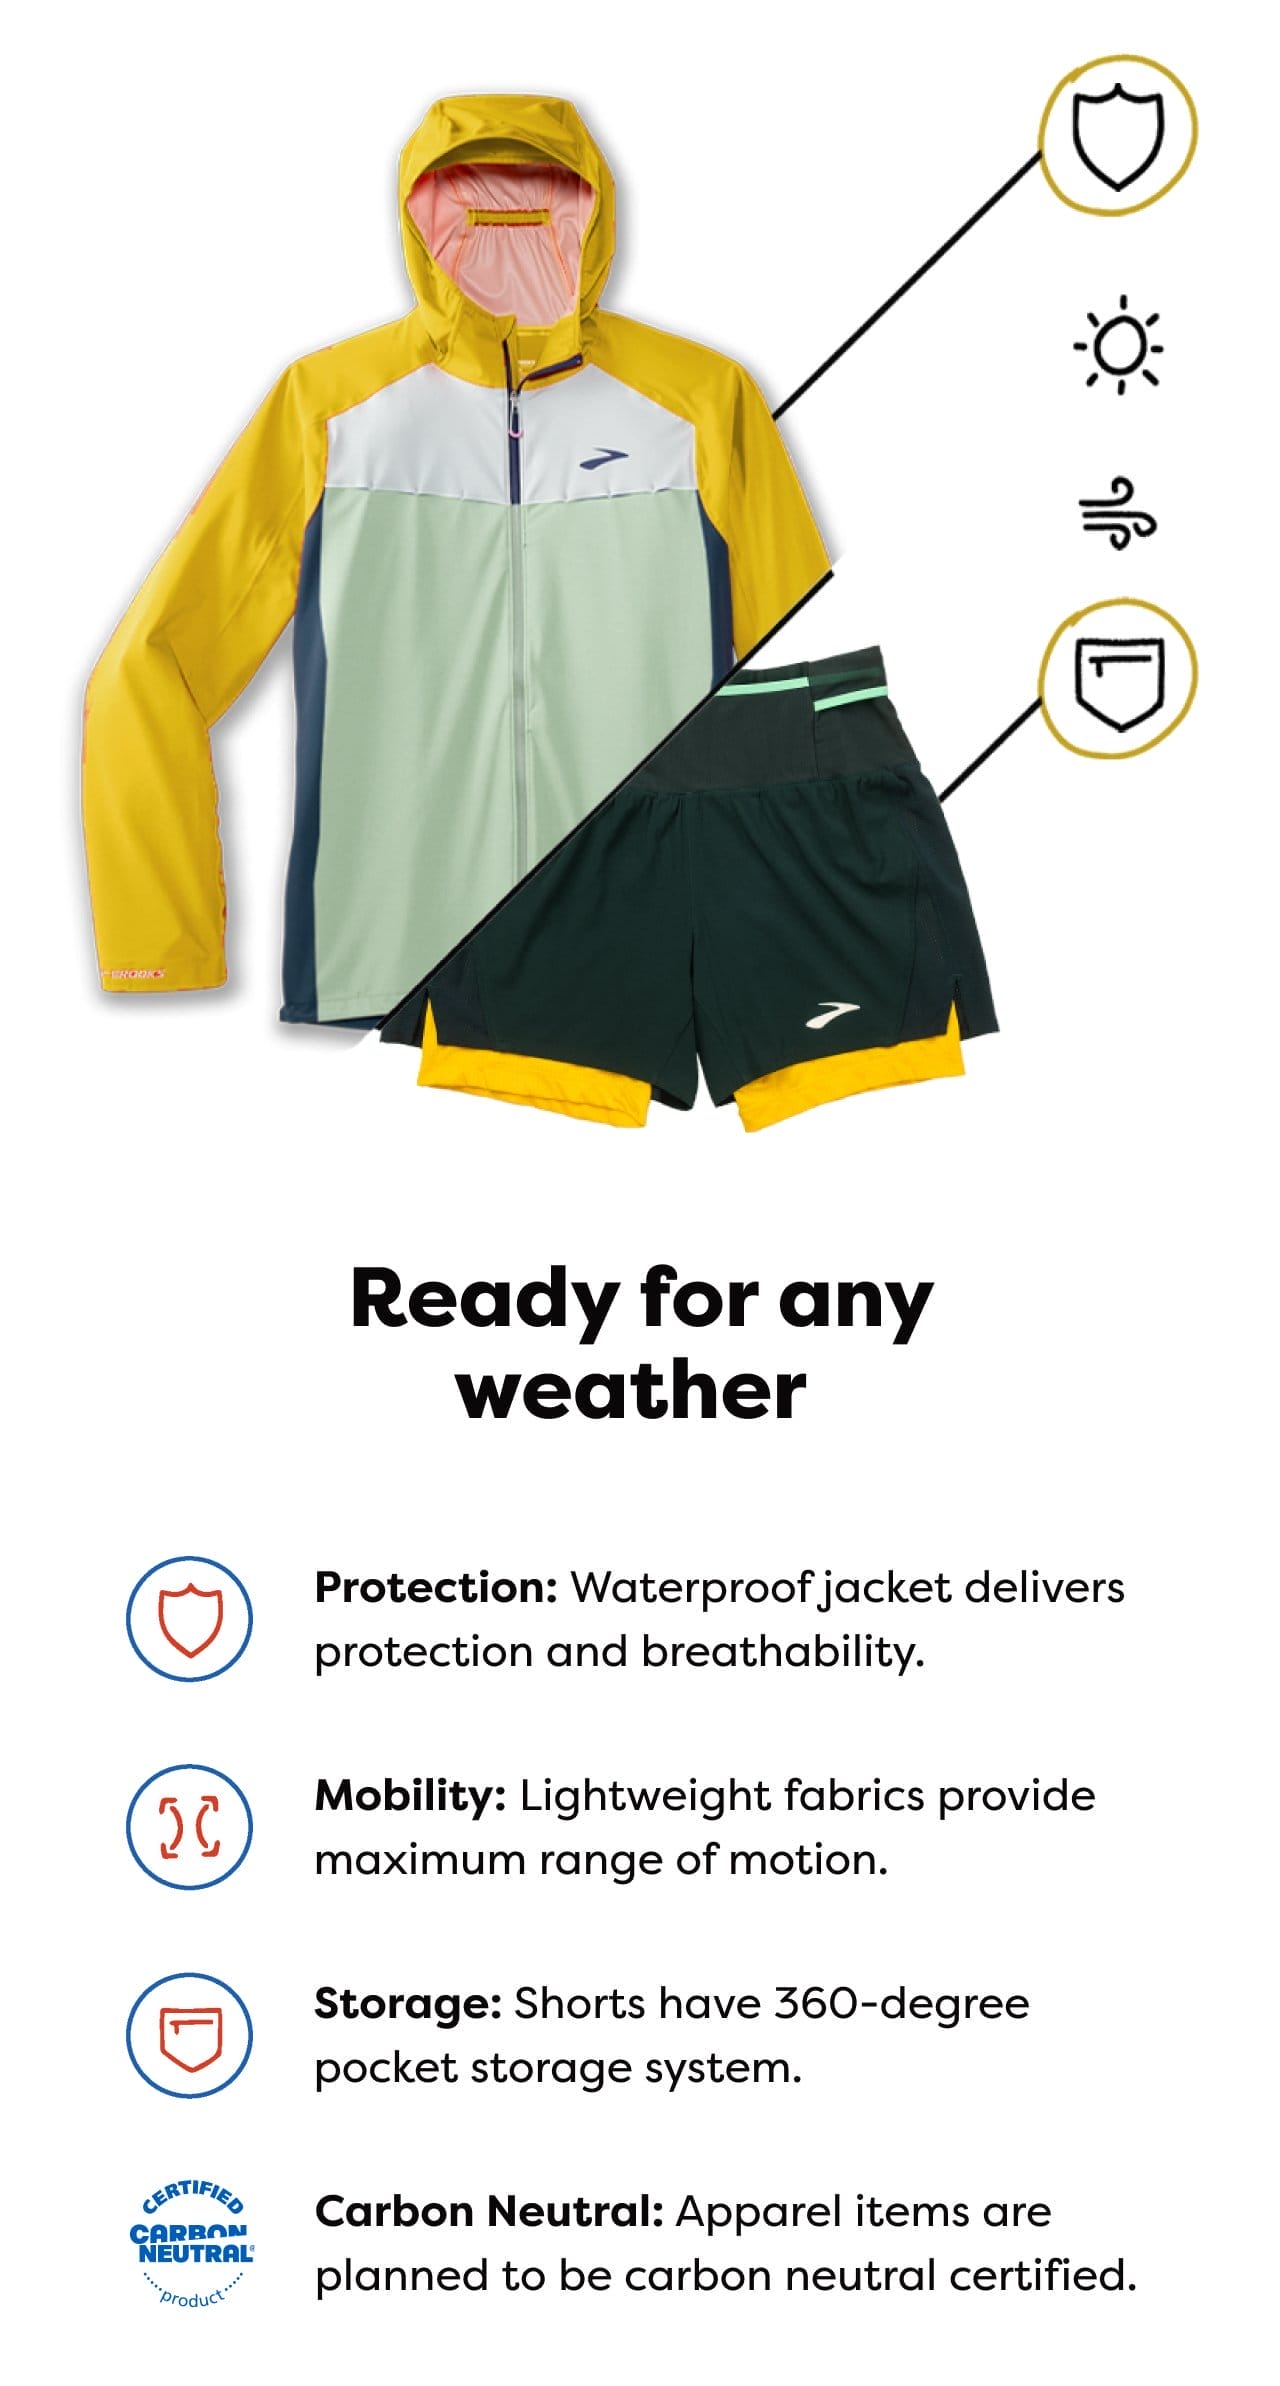 Ready for any weather | Protection: Waterproof jacket delivers protection and breathability. | Mobility: Lightweight fabrics provide maximum range of motion. | Storage: Shorts have 360-degree pocket storage system. | Carbon Neutral: Apparel items are planned to be carbon neutral certified.